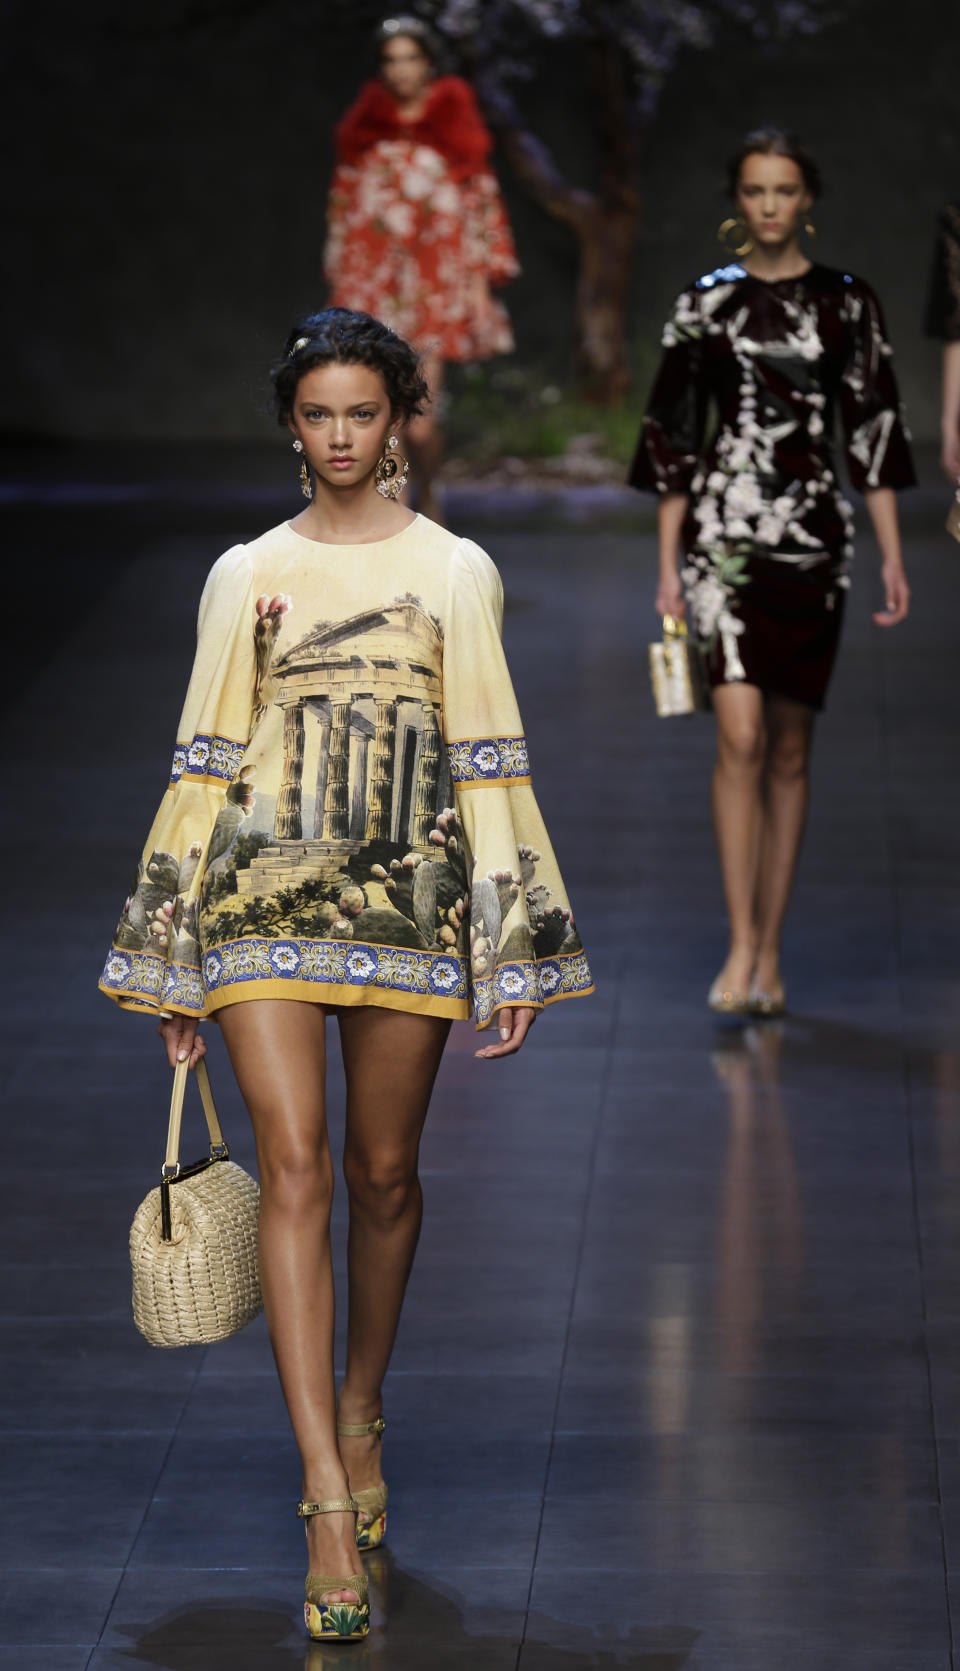 Models wear creations for Dolce & Gabbana women's Spring-Summer 2014 collection, part of the Milan Fashion Week, unveiled in Milan, Italy, Sunday, Sept. 22, 2013. (AP Photo/Luca Bruno)